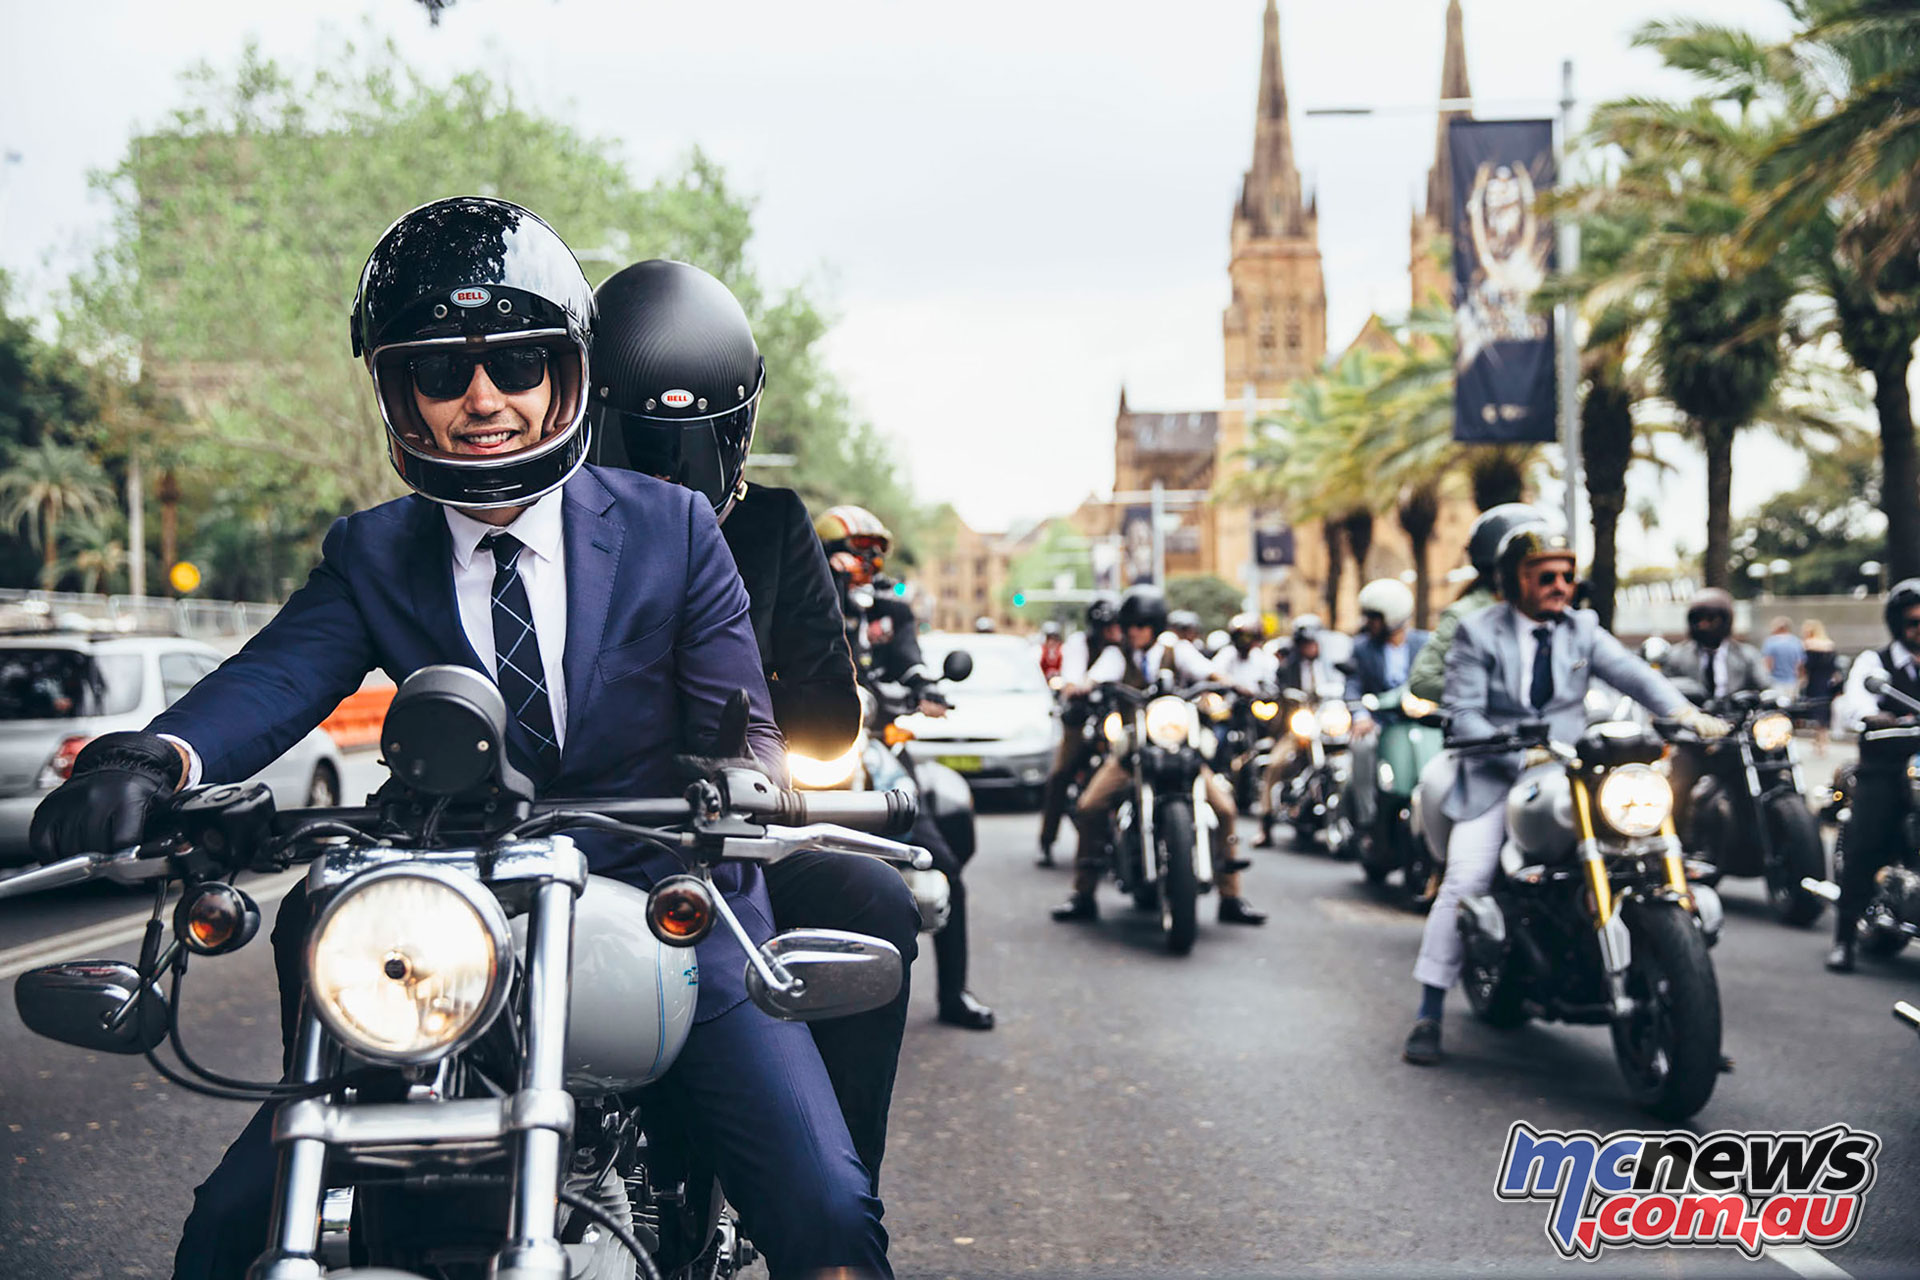 Pete Cagnacci - Professional Photographer - The Distinguished Gentleman's  Ride